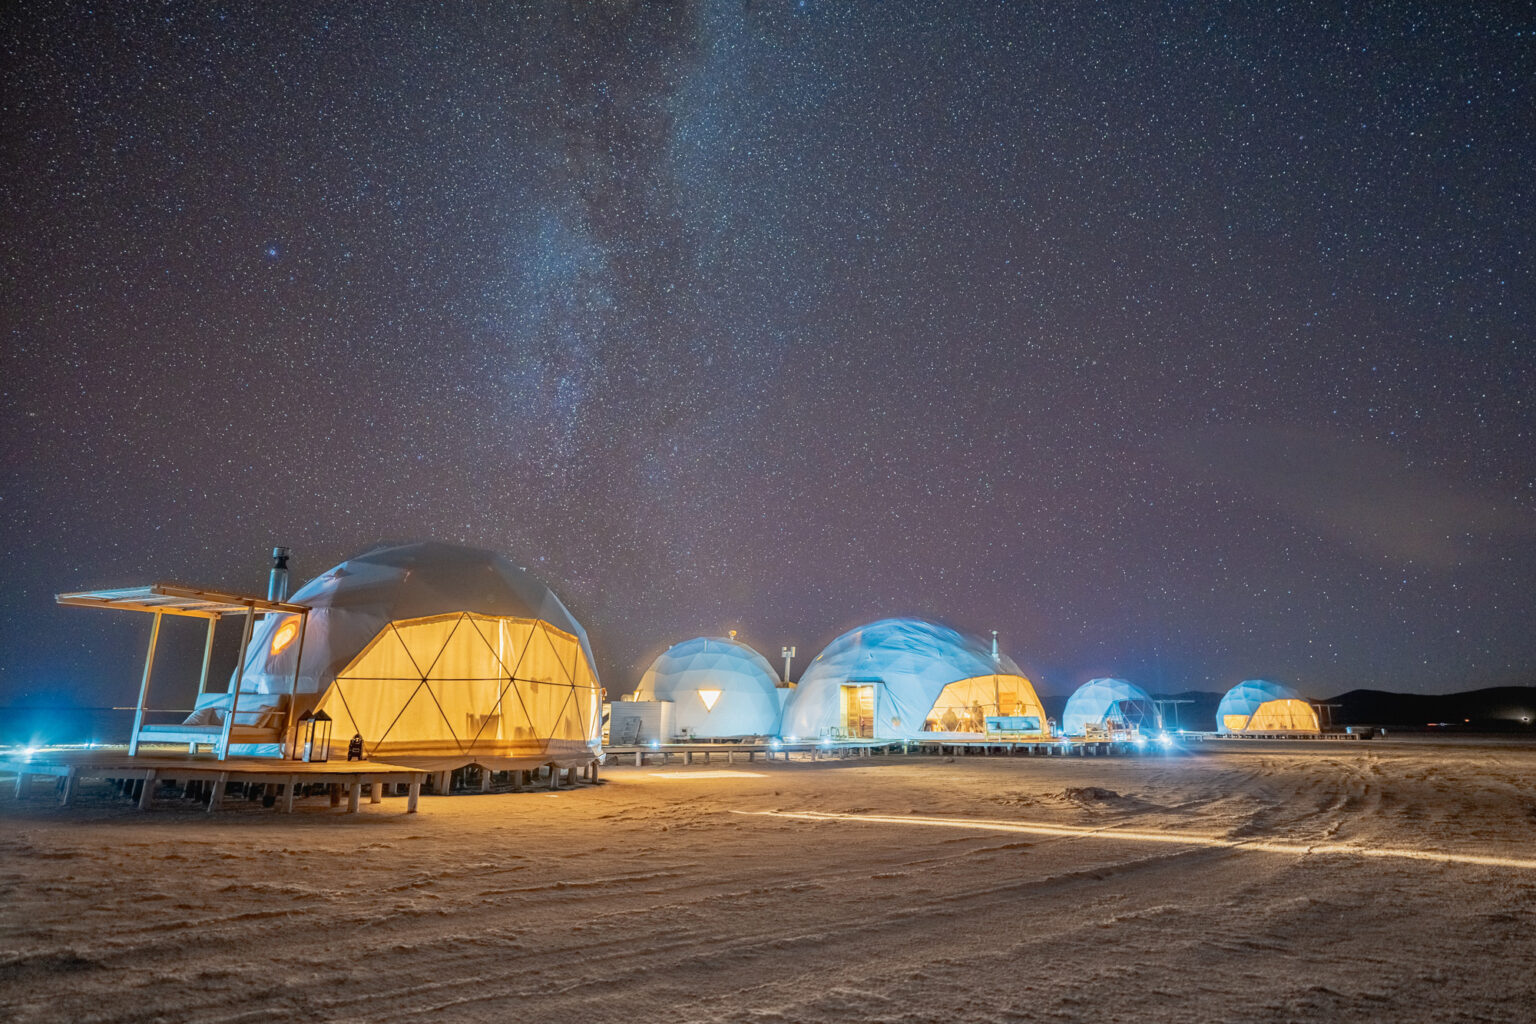 White domes with large windows on salt flat at night